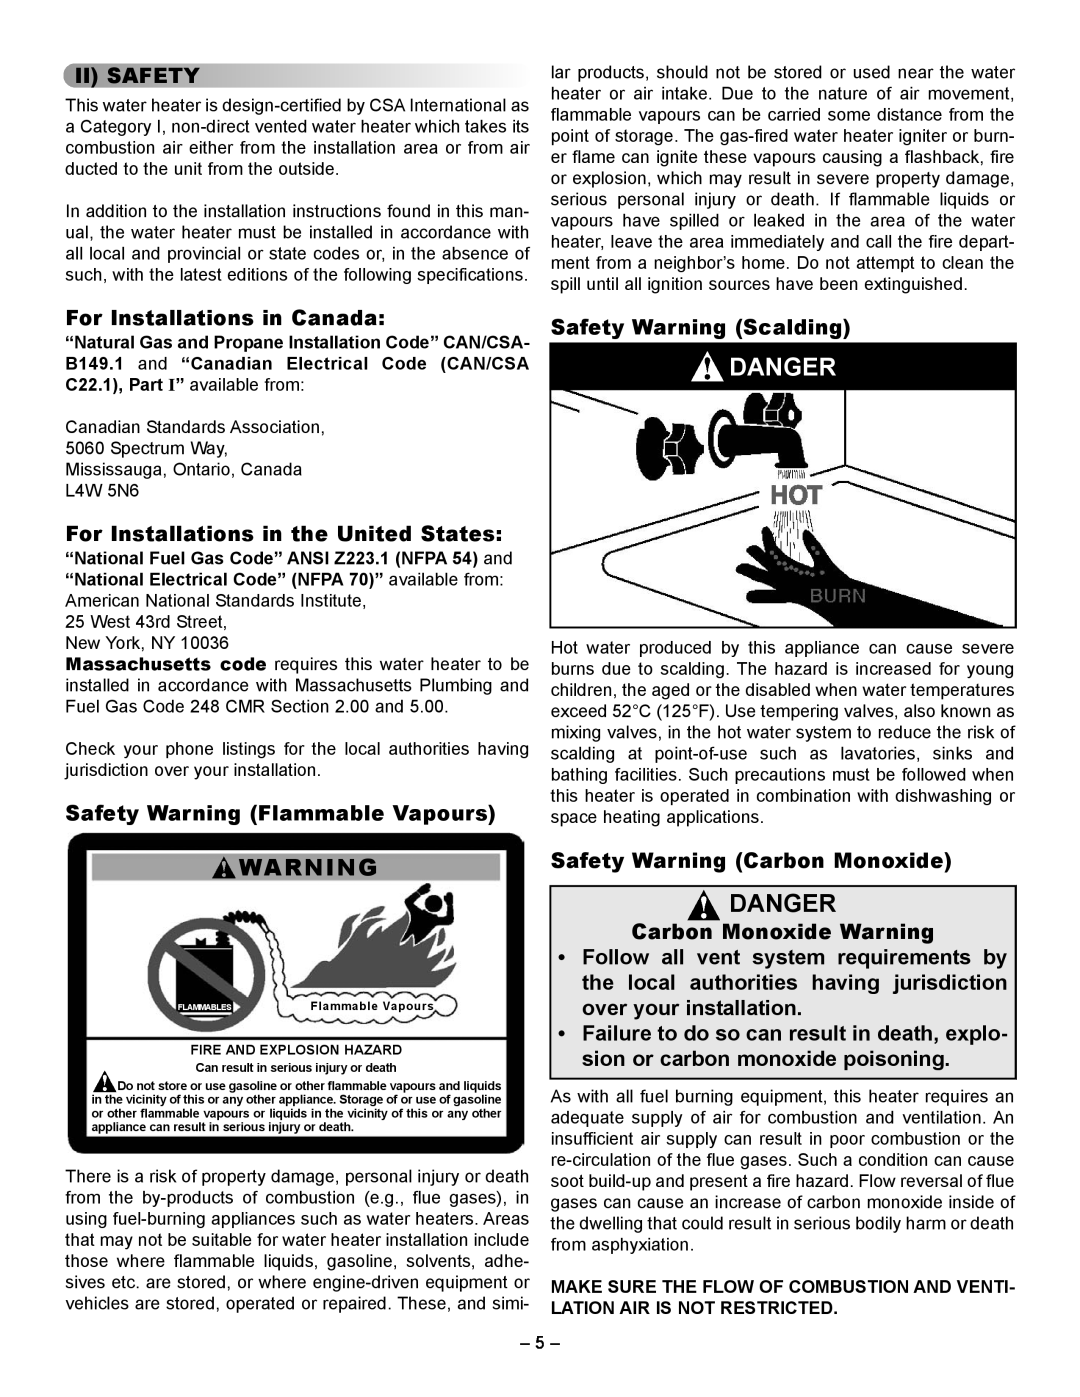 GSW 5065 Danger, Ii Safety, For Installations in Canada, For Installations in the United States, Safety Warning Scalding 